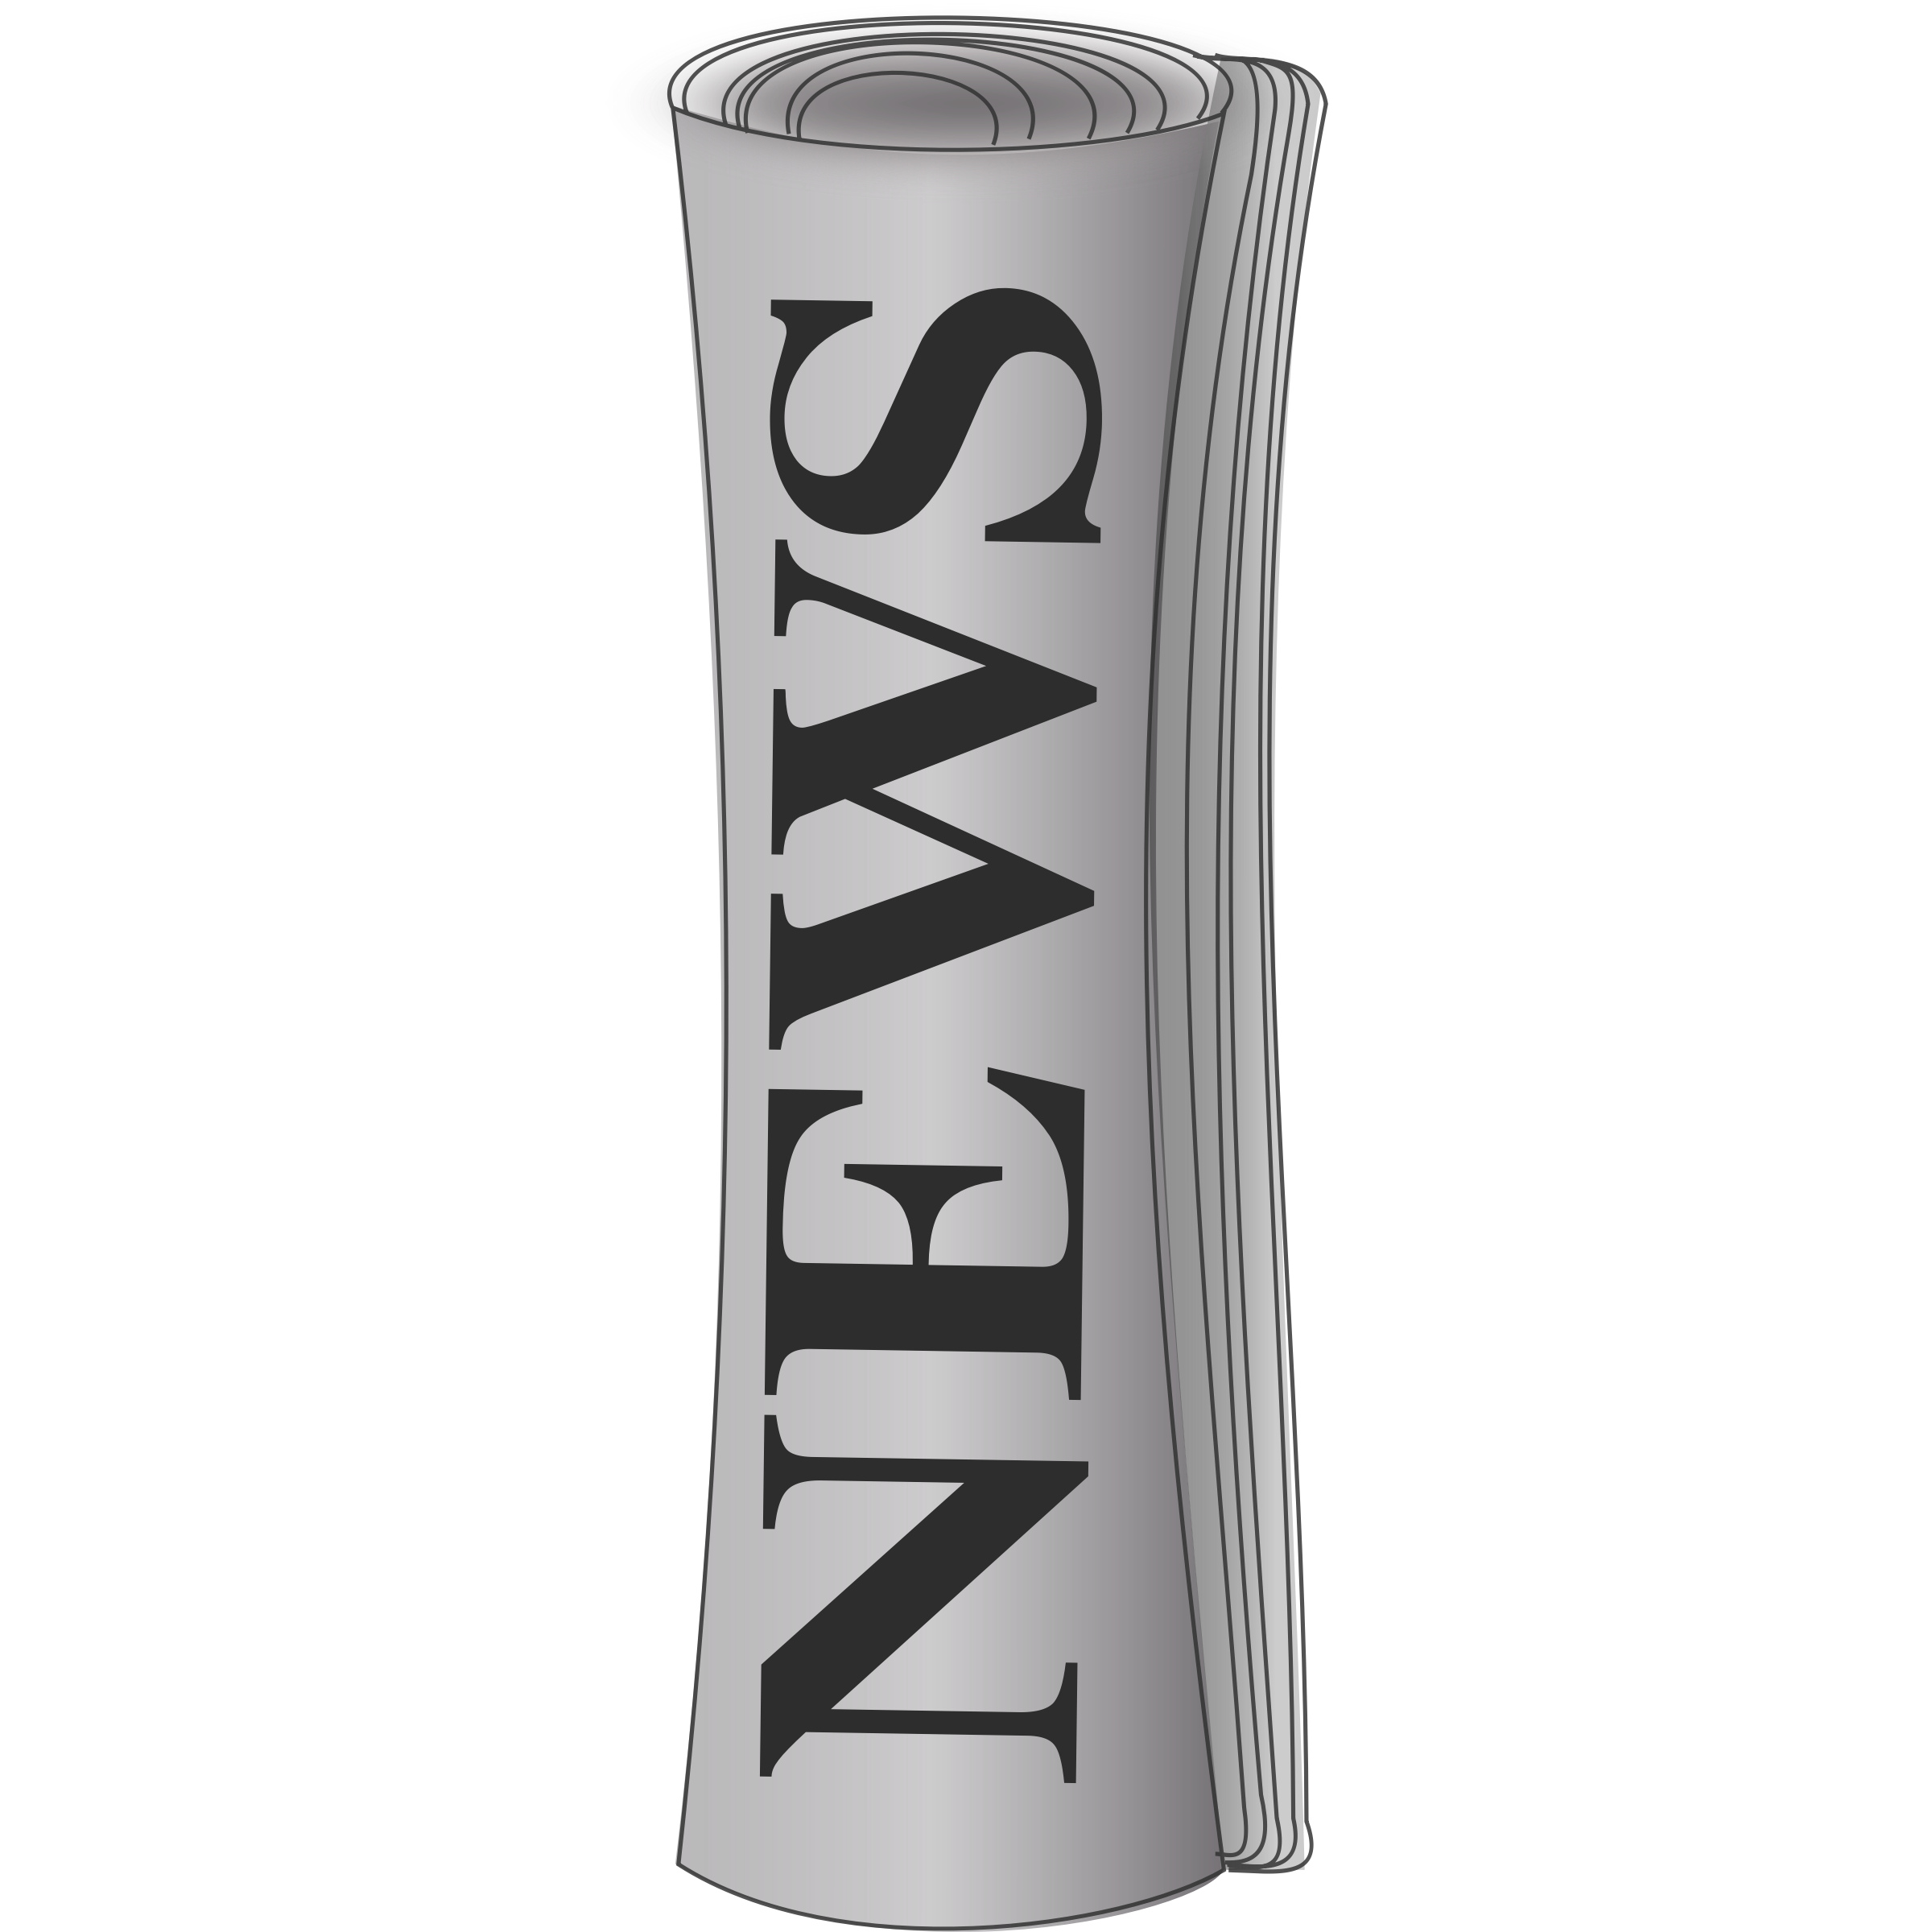 Newspaper 4 Image Png Image Clipart